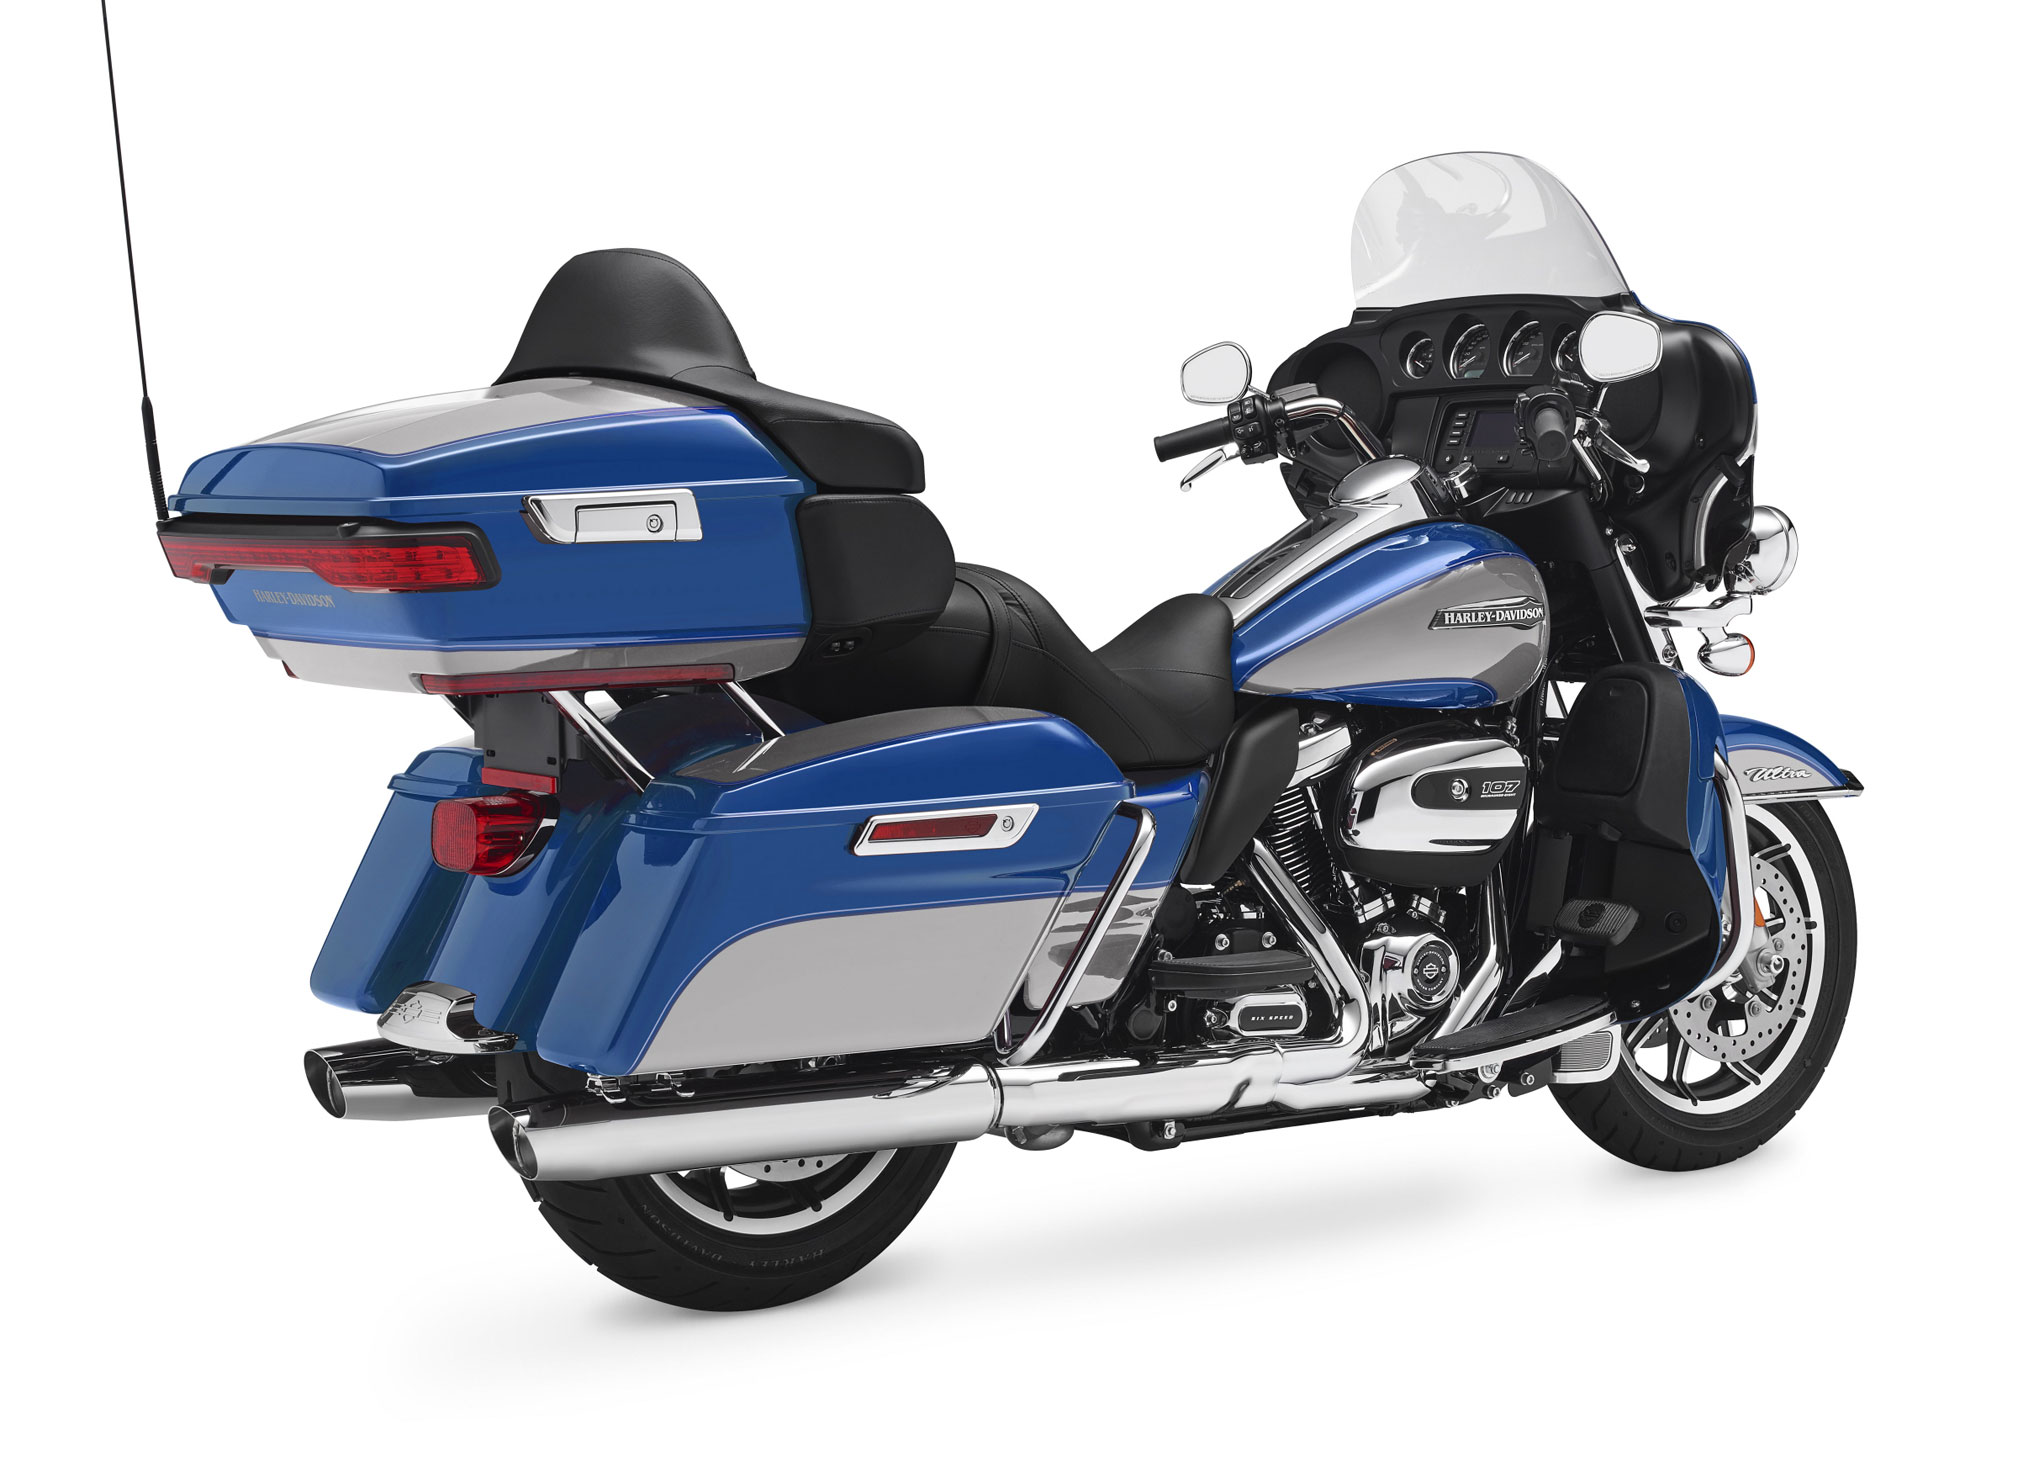 2019 Harley Davidson Electra Glide Ultra Classic Review 